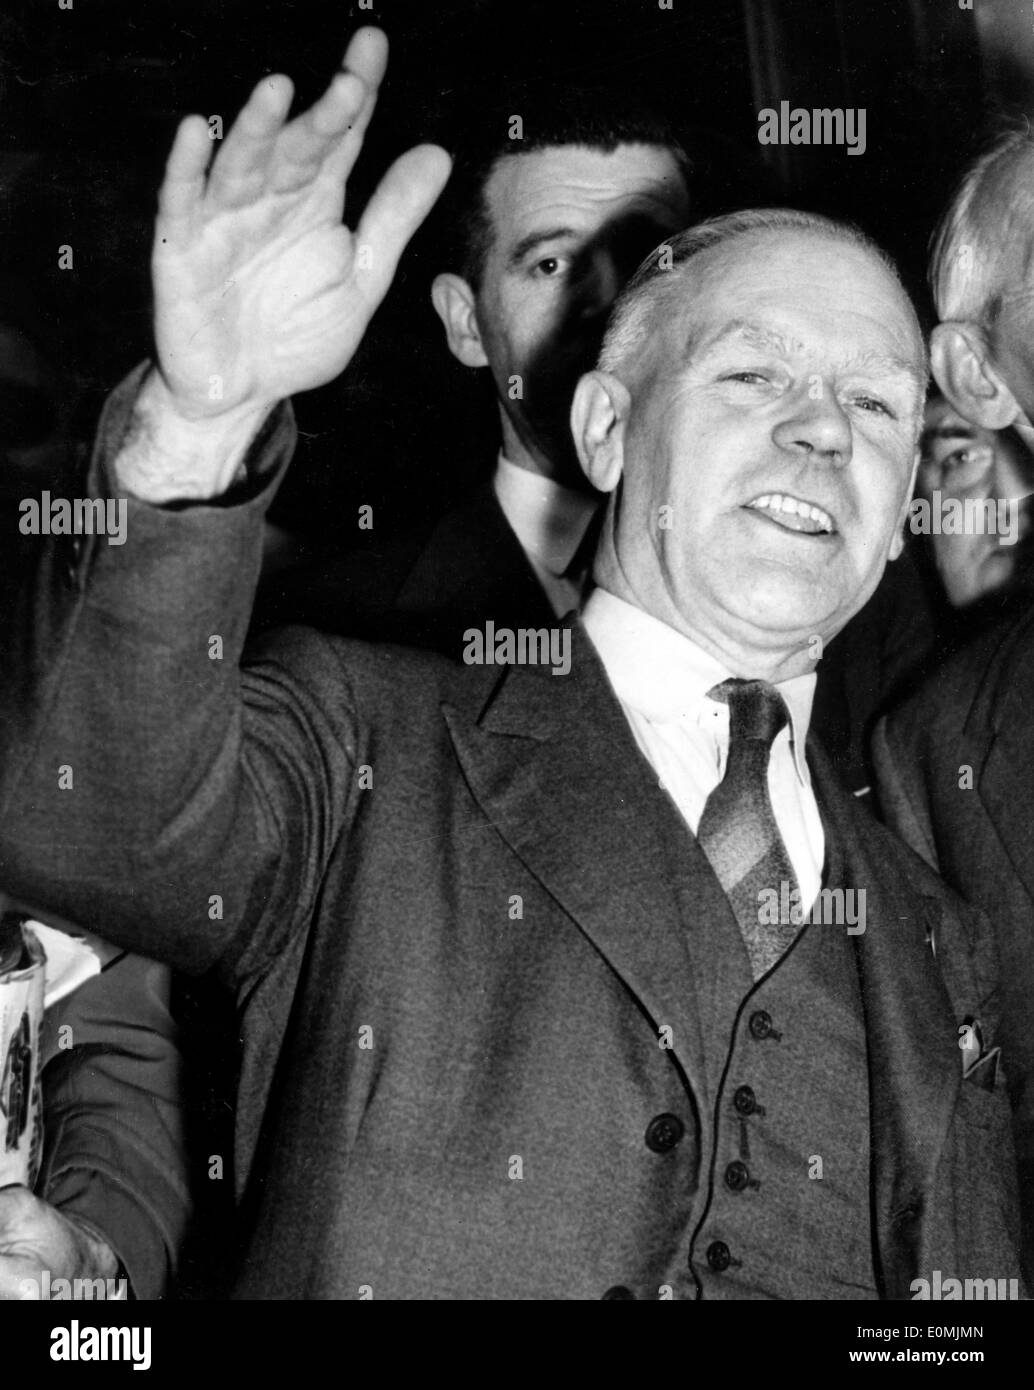 Jun 14, 1955; London, UK; The rail strike ended this evening after all day talks at the Ministry of Labour between Sir Brian Robertson, representatives of the British Transport Commission and the two rail unions. The picture shows Mr. JIM BATY, the A.S.L.E.F. chief smilling as waving to the crowd as he leaves the Ministry of Labour after the settlement of the strike. Stock Photo